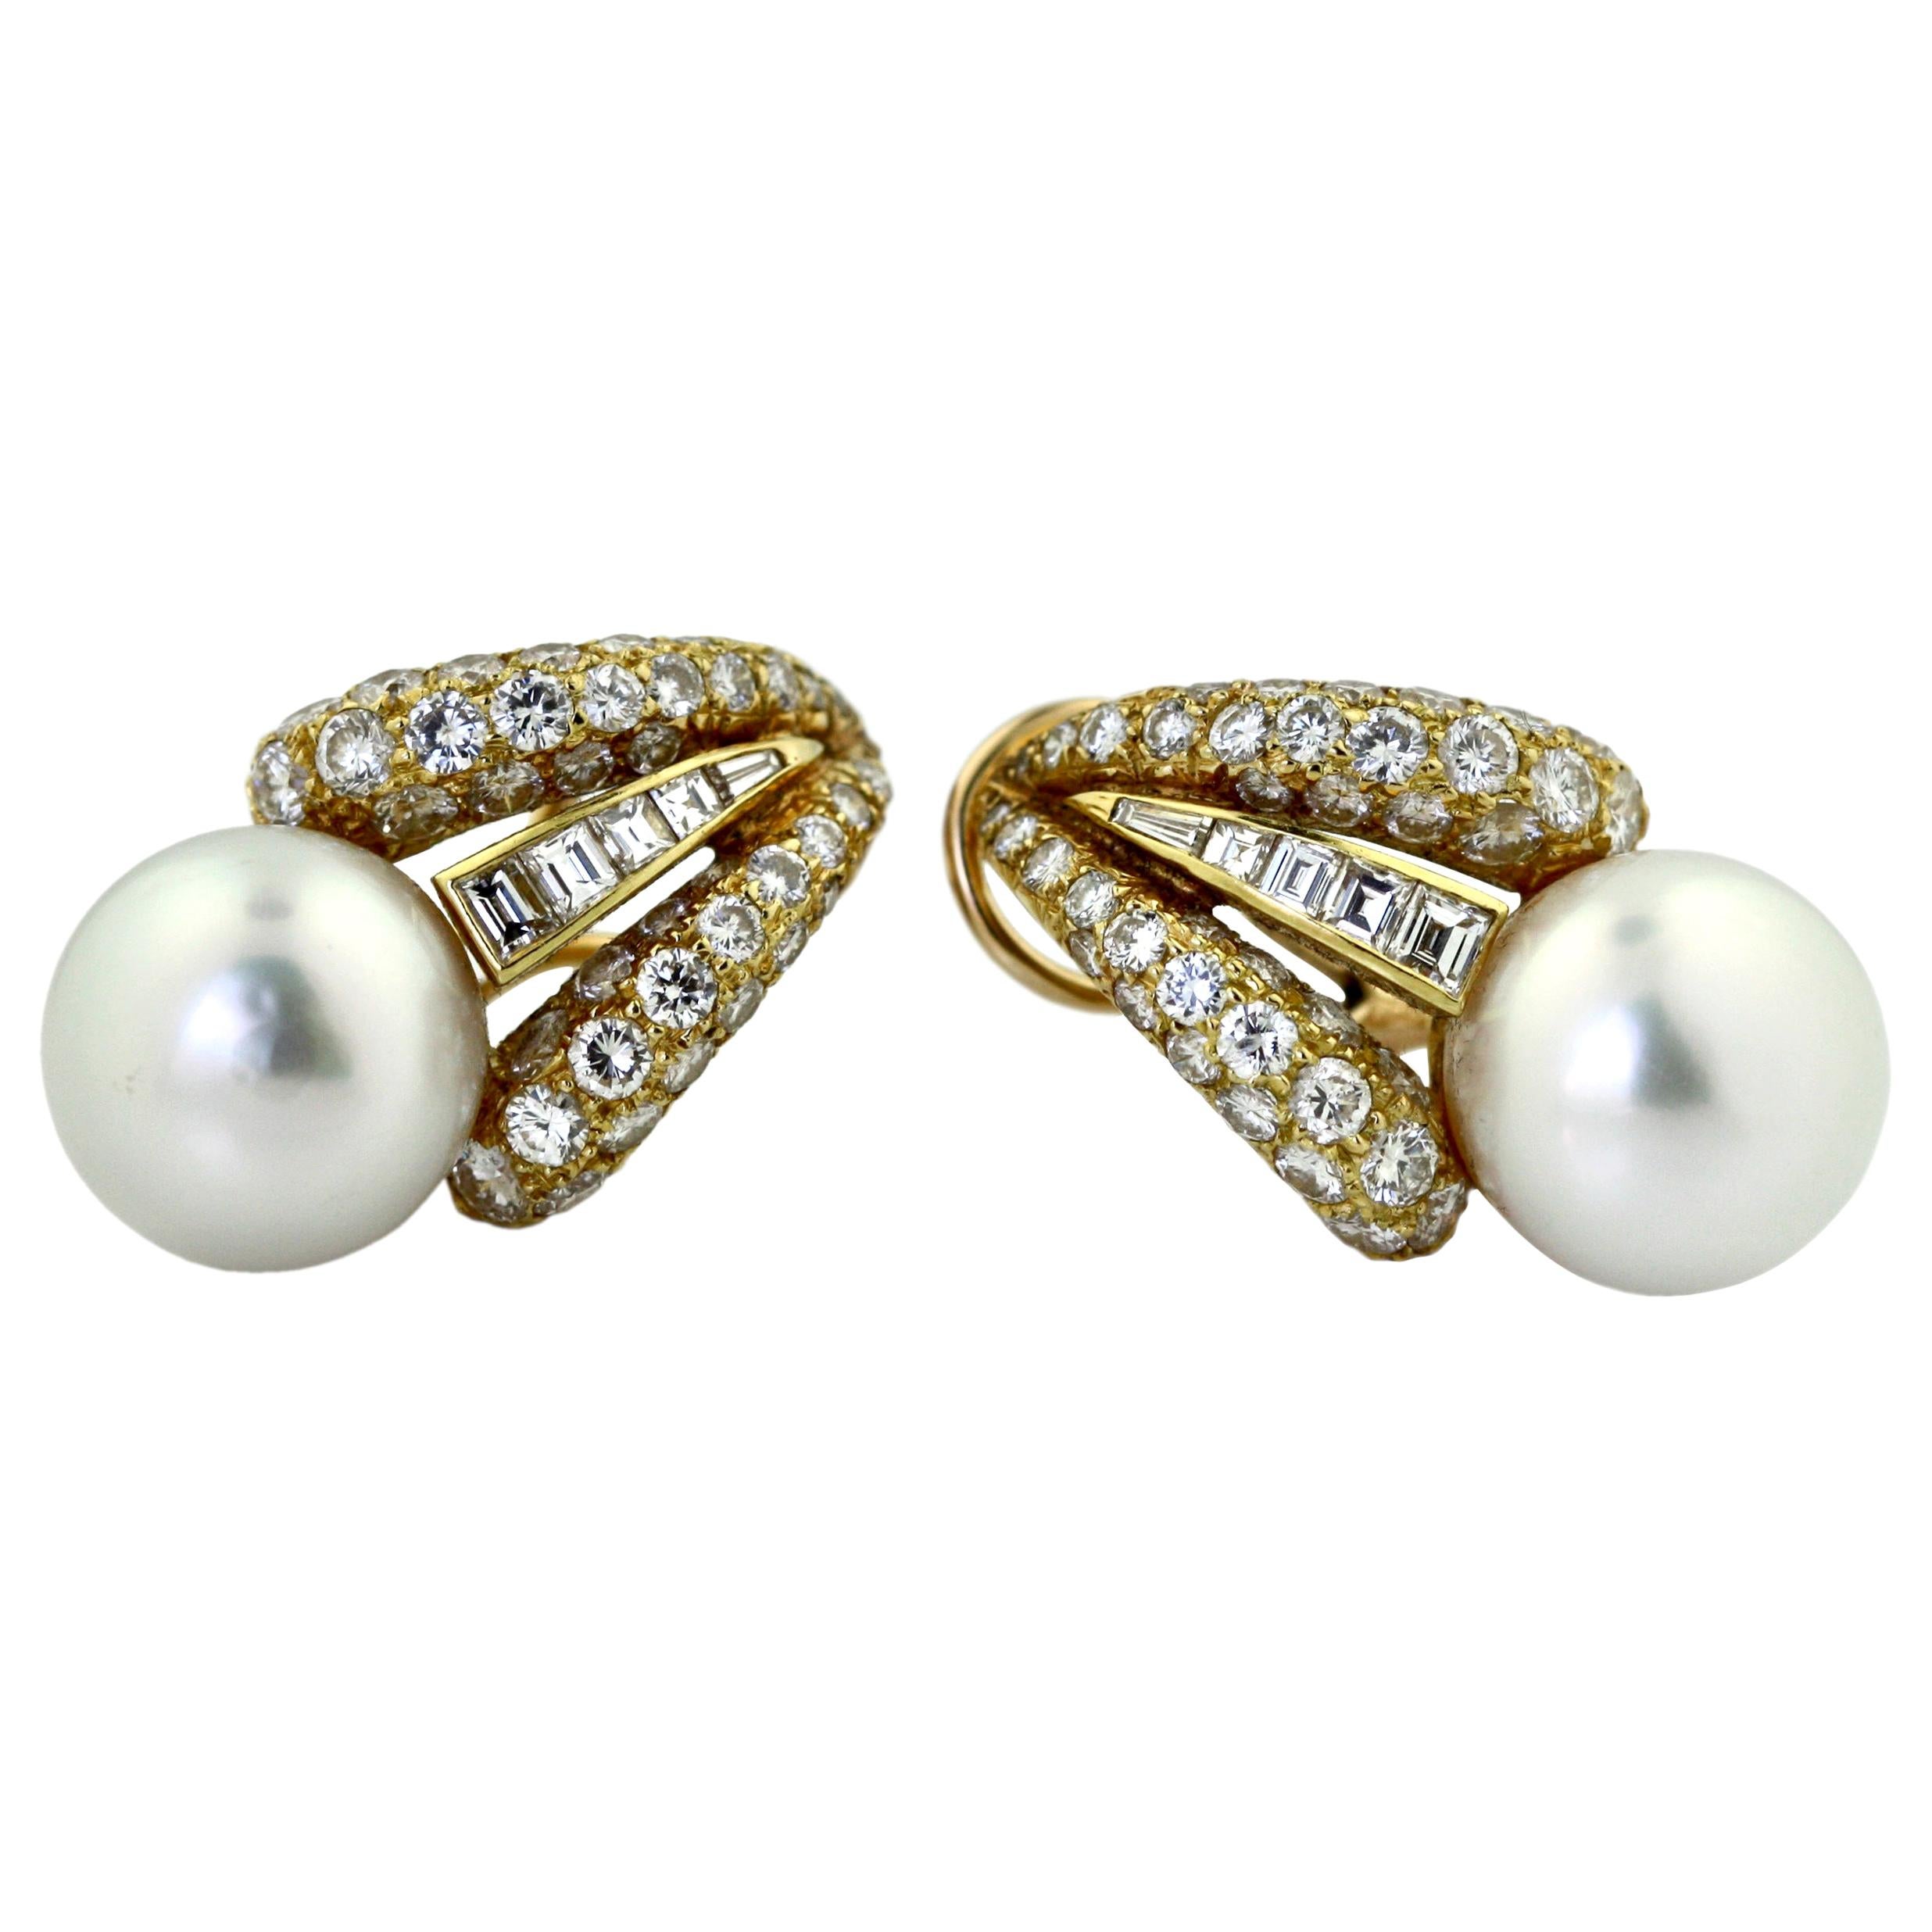 Pair of 18 Karat Yellow Gold, Cultured Pearl and Diamond Earclips, Emis